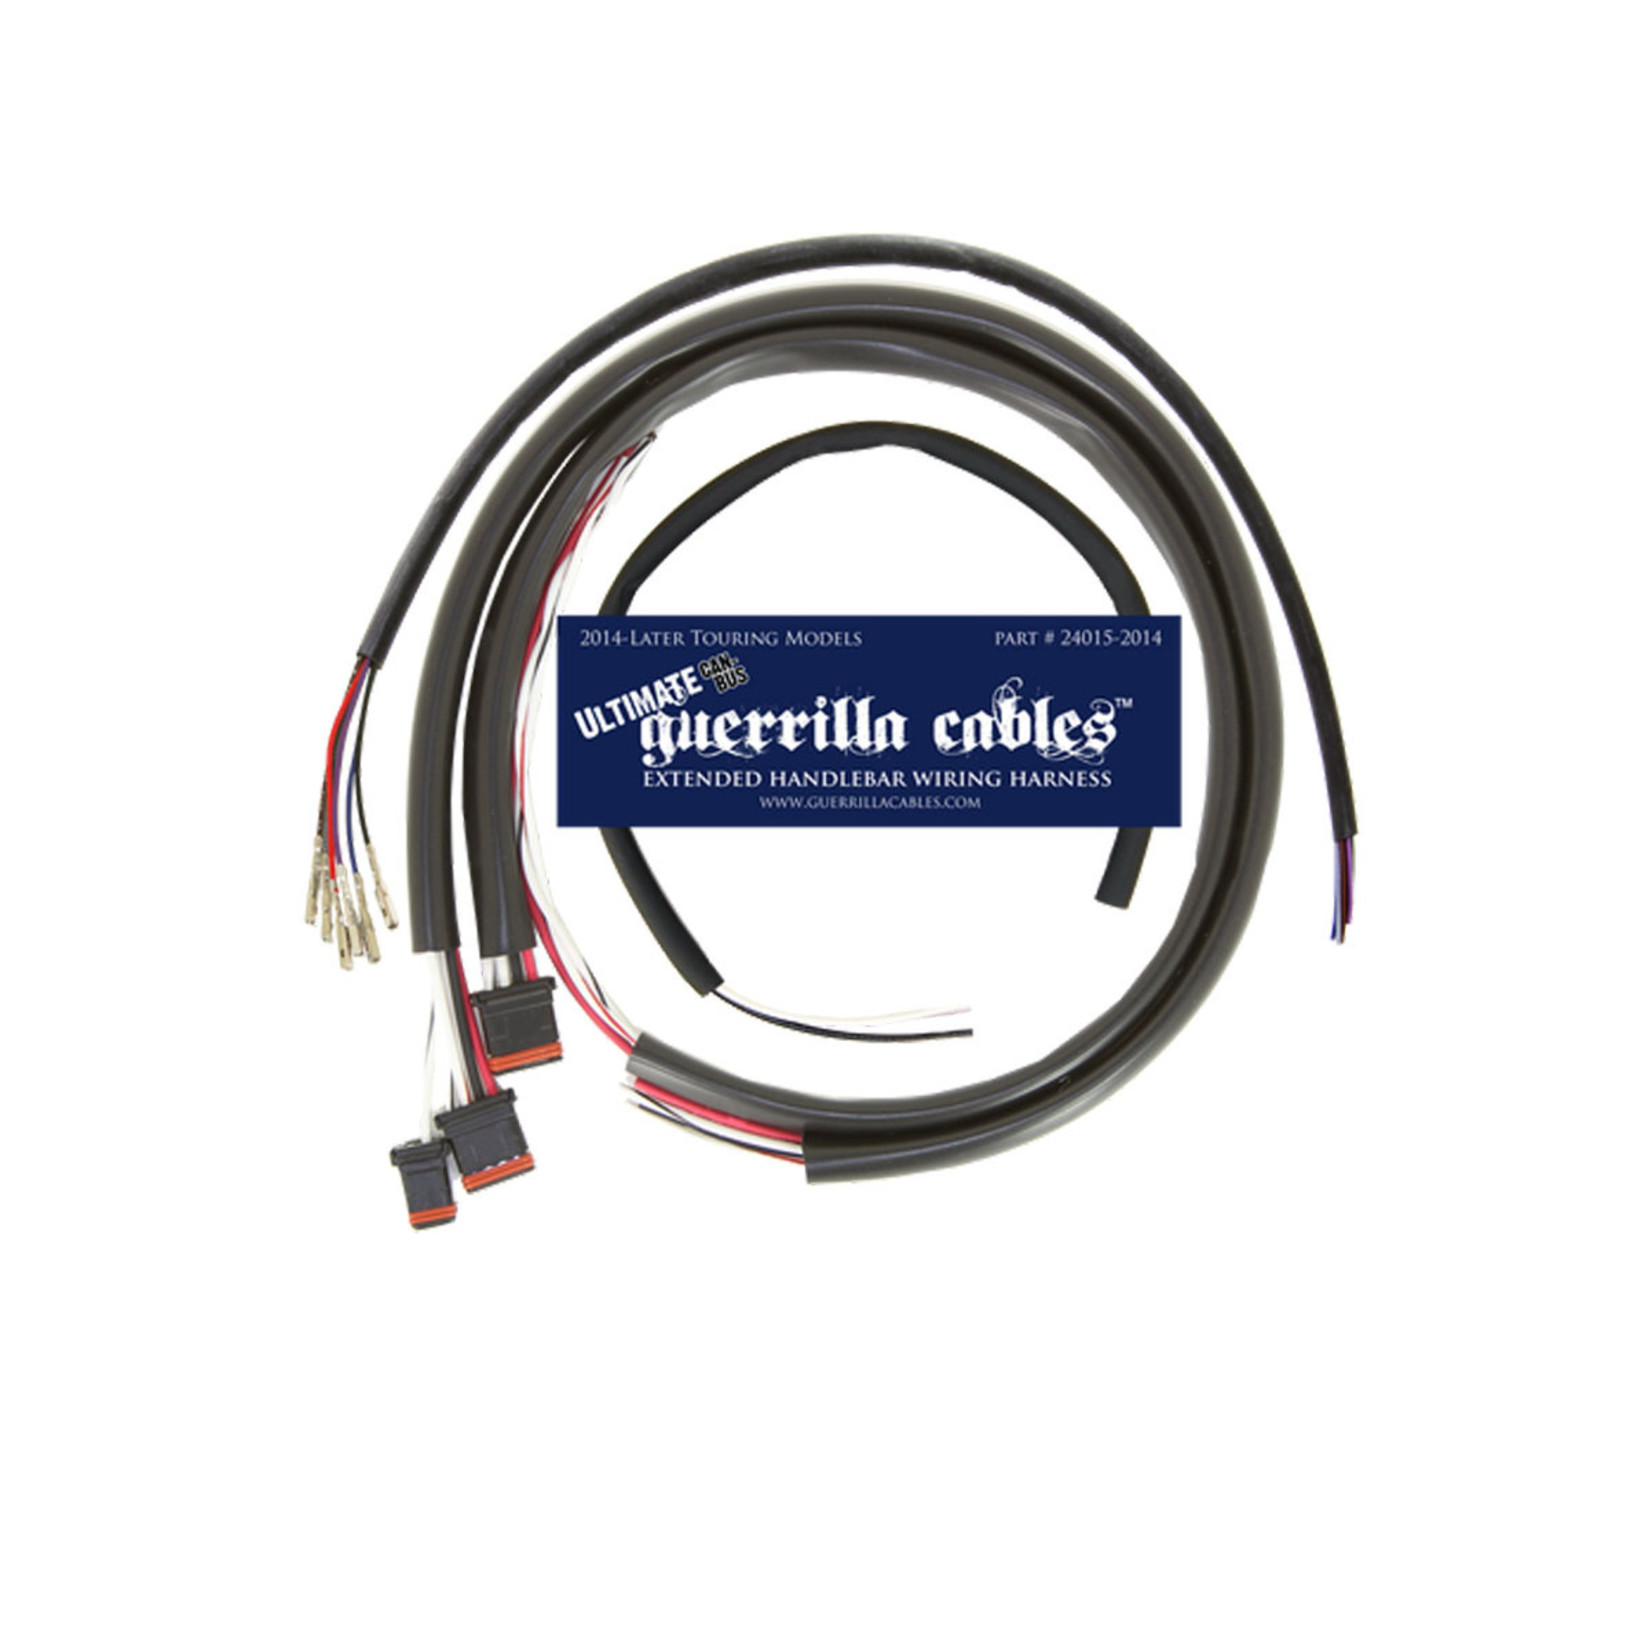 GUERRILLA CABLES GUERRILLA CABLES 2014-2015 ULTIMATE CAN-BUS BAGGER W/ THROTTLE-BY-WIRE